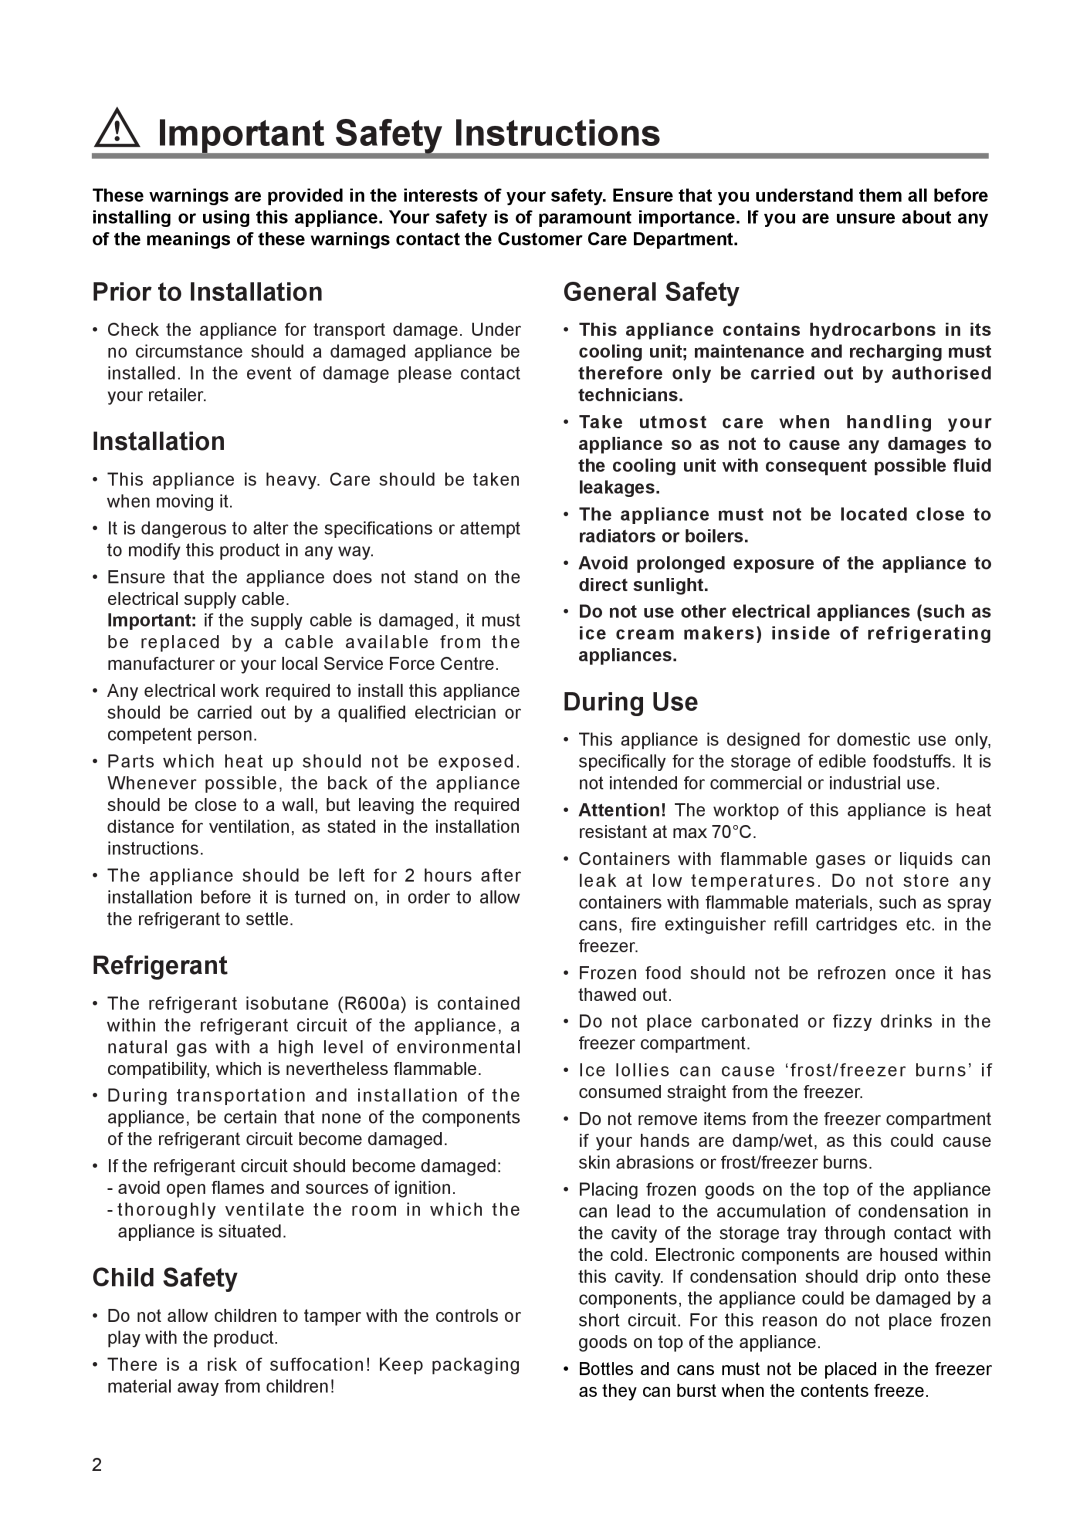 Zanussi ZEUT 6173 S manual Important Safety Instructions, Prior to Installation, Refrigerant, Child Safety, General Safety 